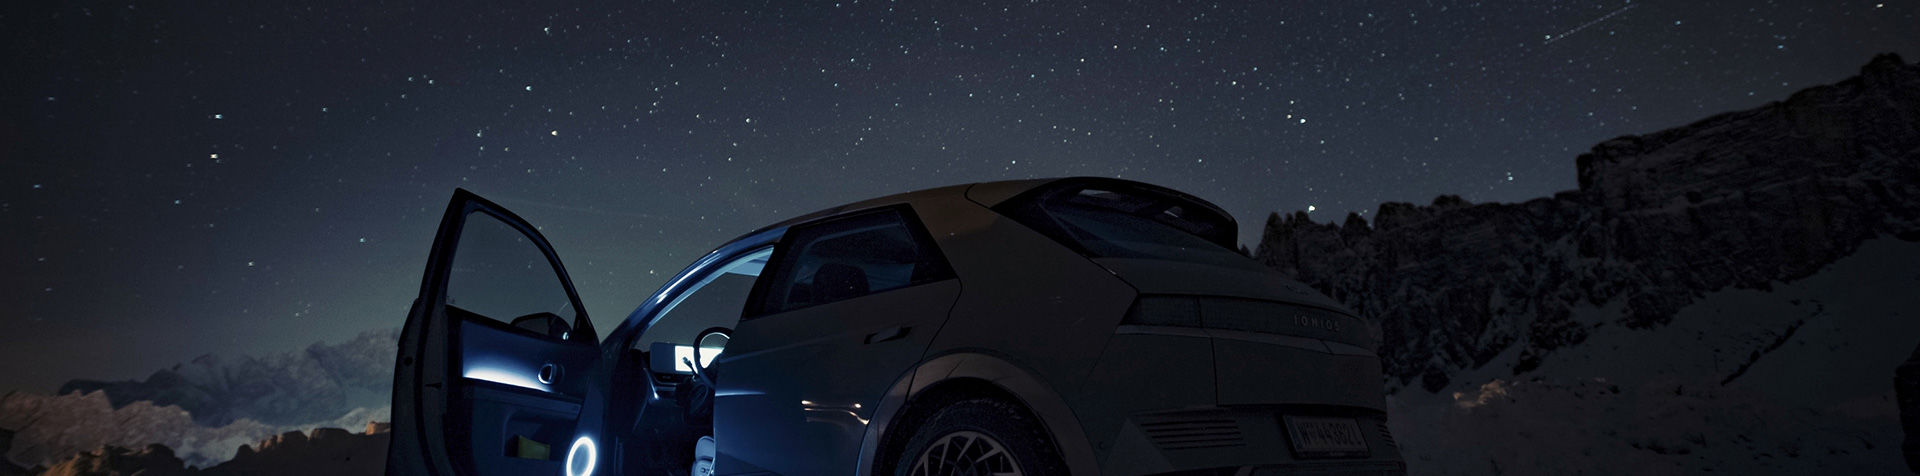 An IONIQ 5 standing with the side door open in the middle of a mountainous landscape with stars shining overhead.